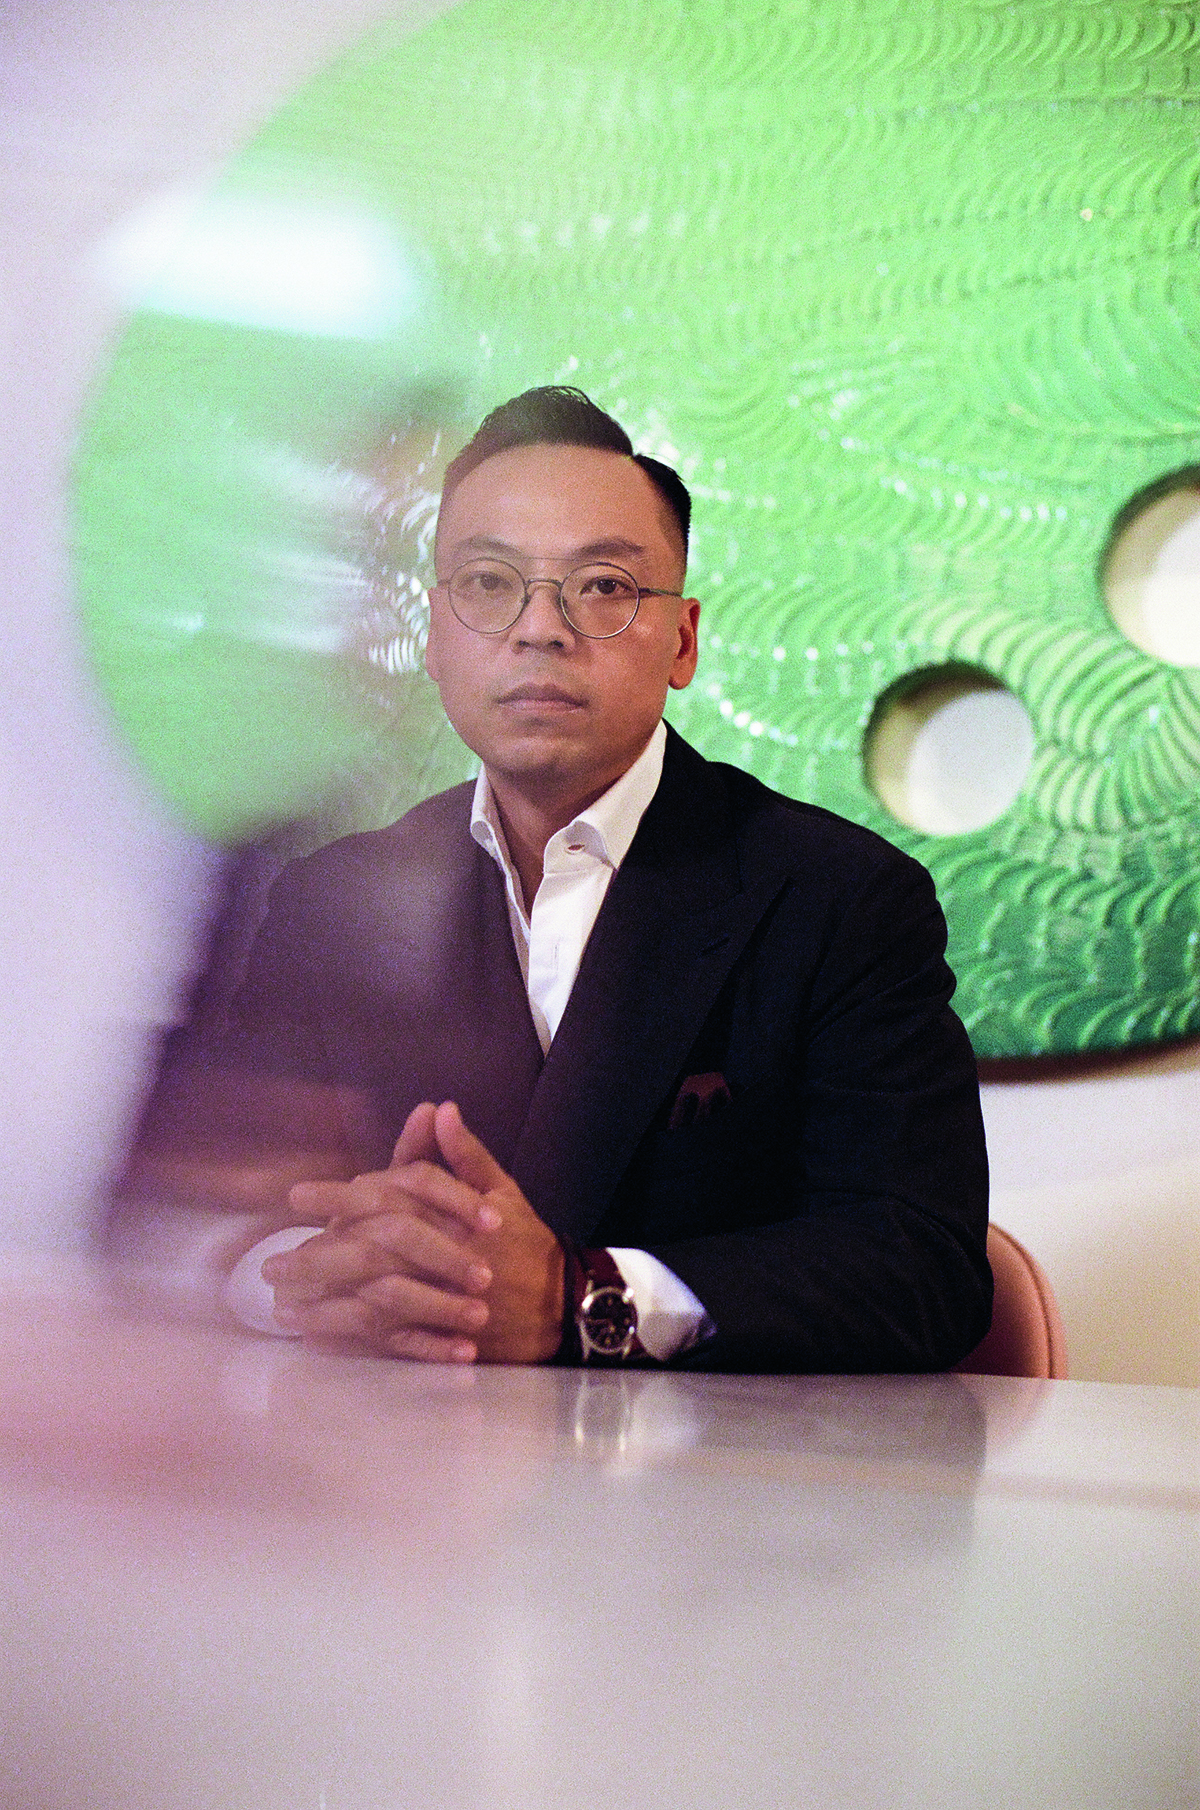 A man wearing a suit sitting in front of a green piece of art